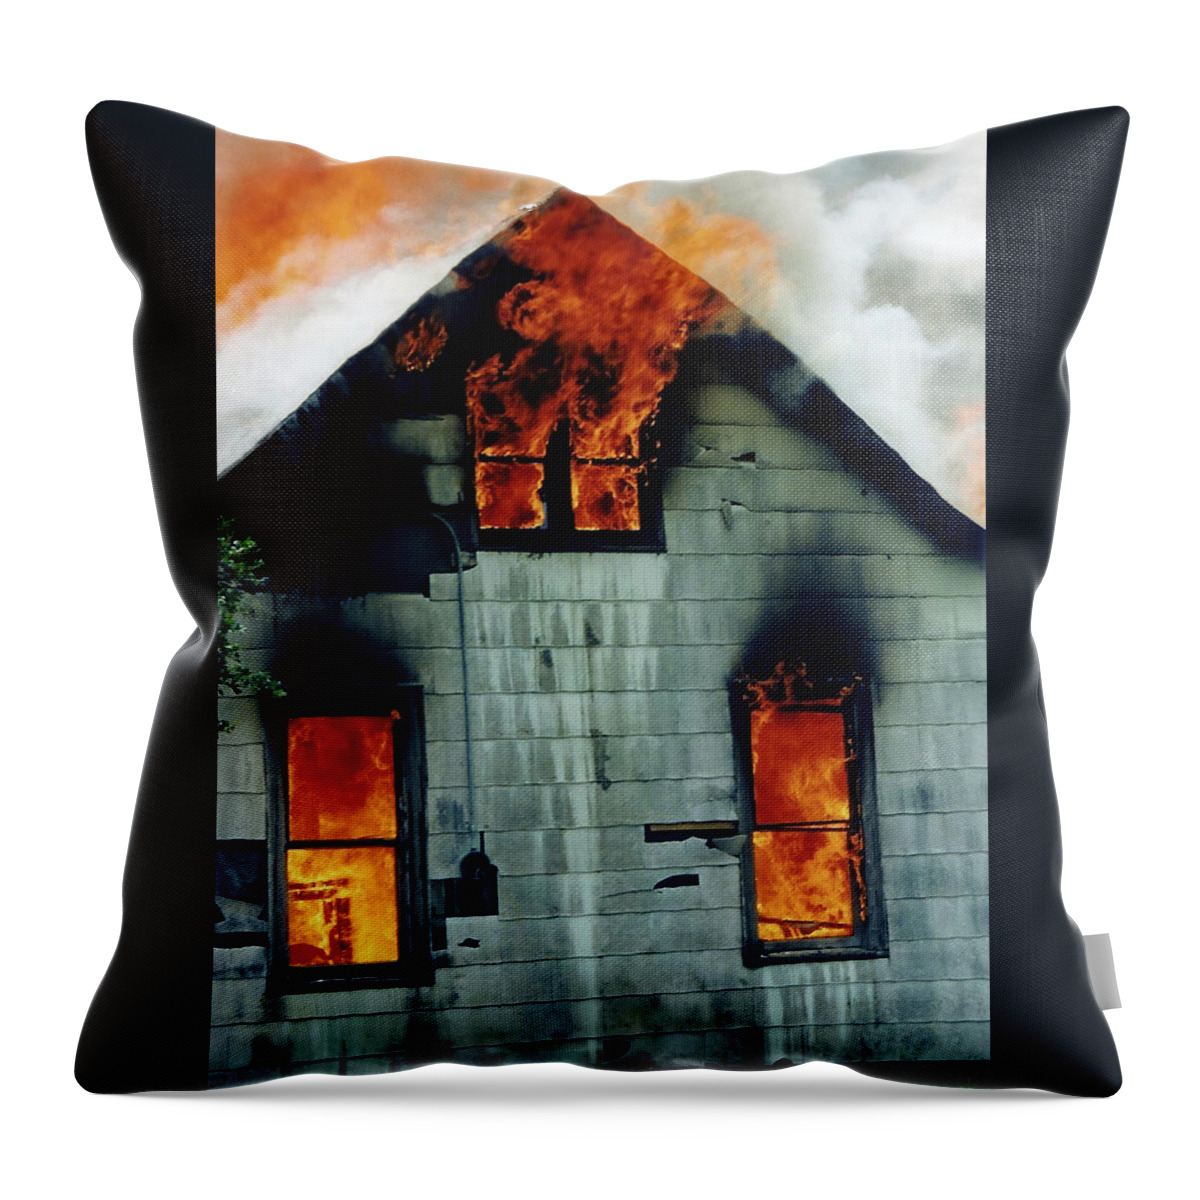 Windows Aflame Throw Pillow featuring the photograph Windows Aflame by Jennifer Robin